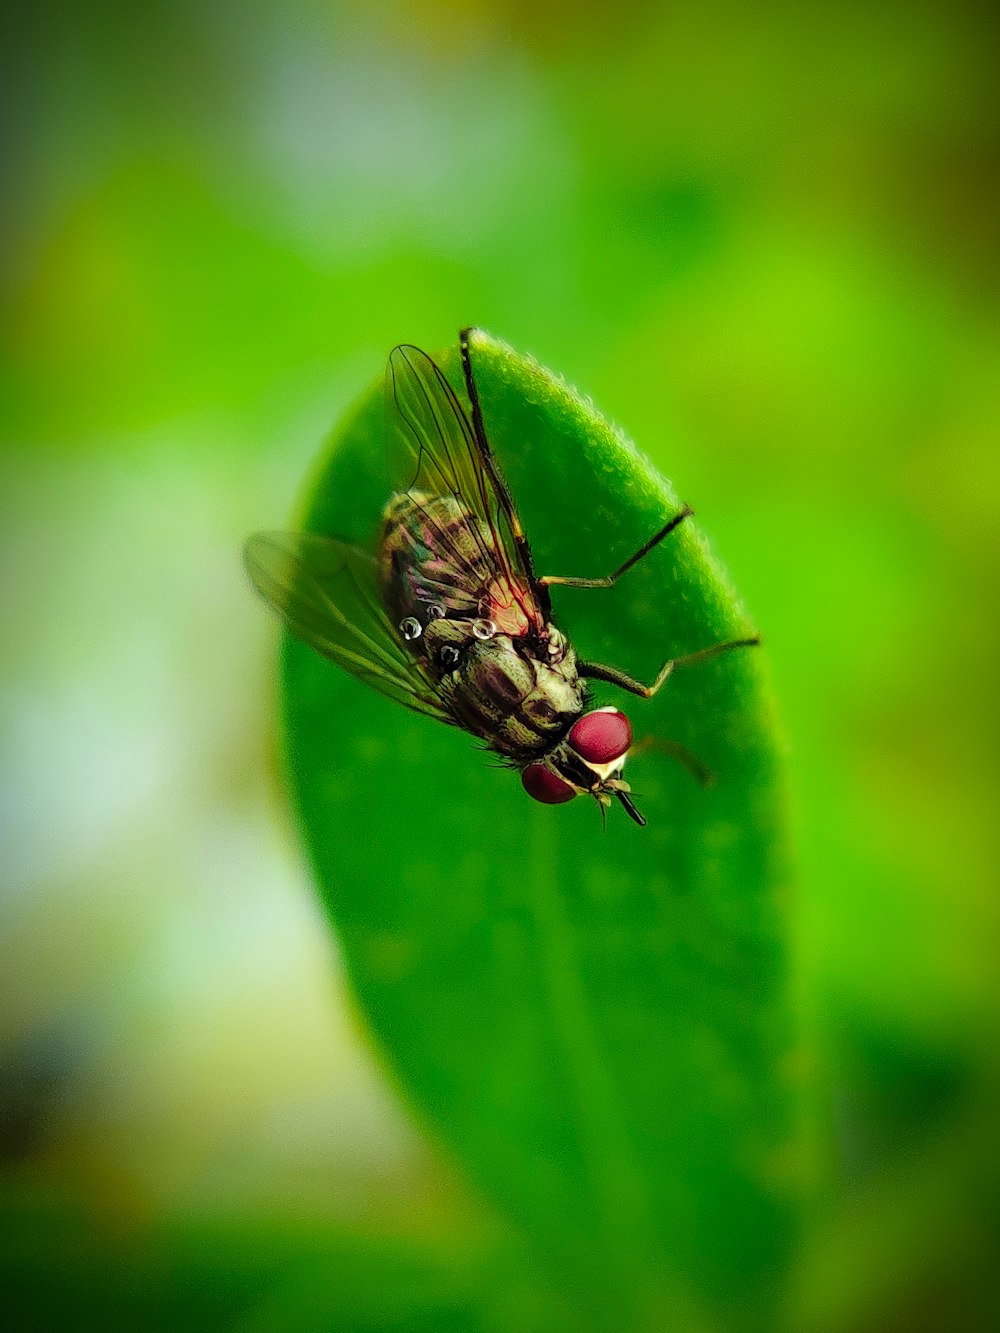 black fly perched on green leaf in close up photography during daytime